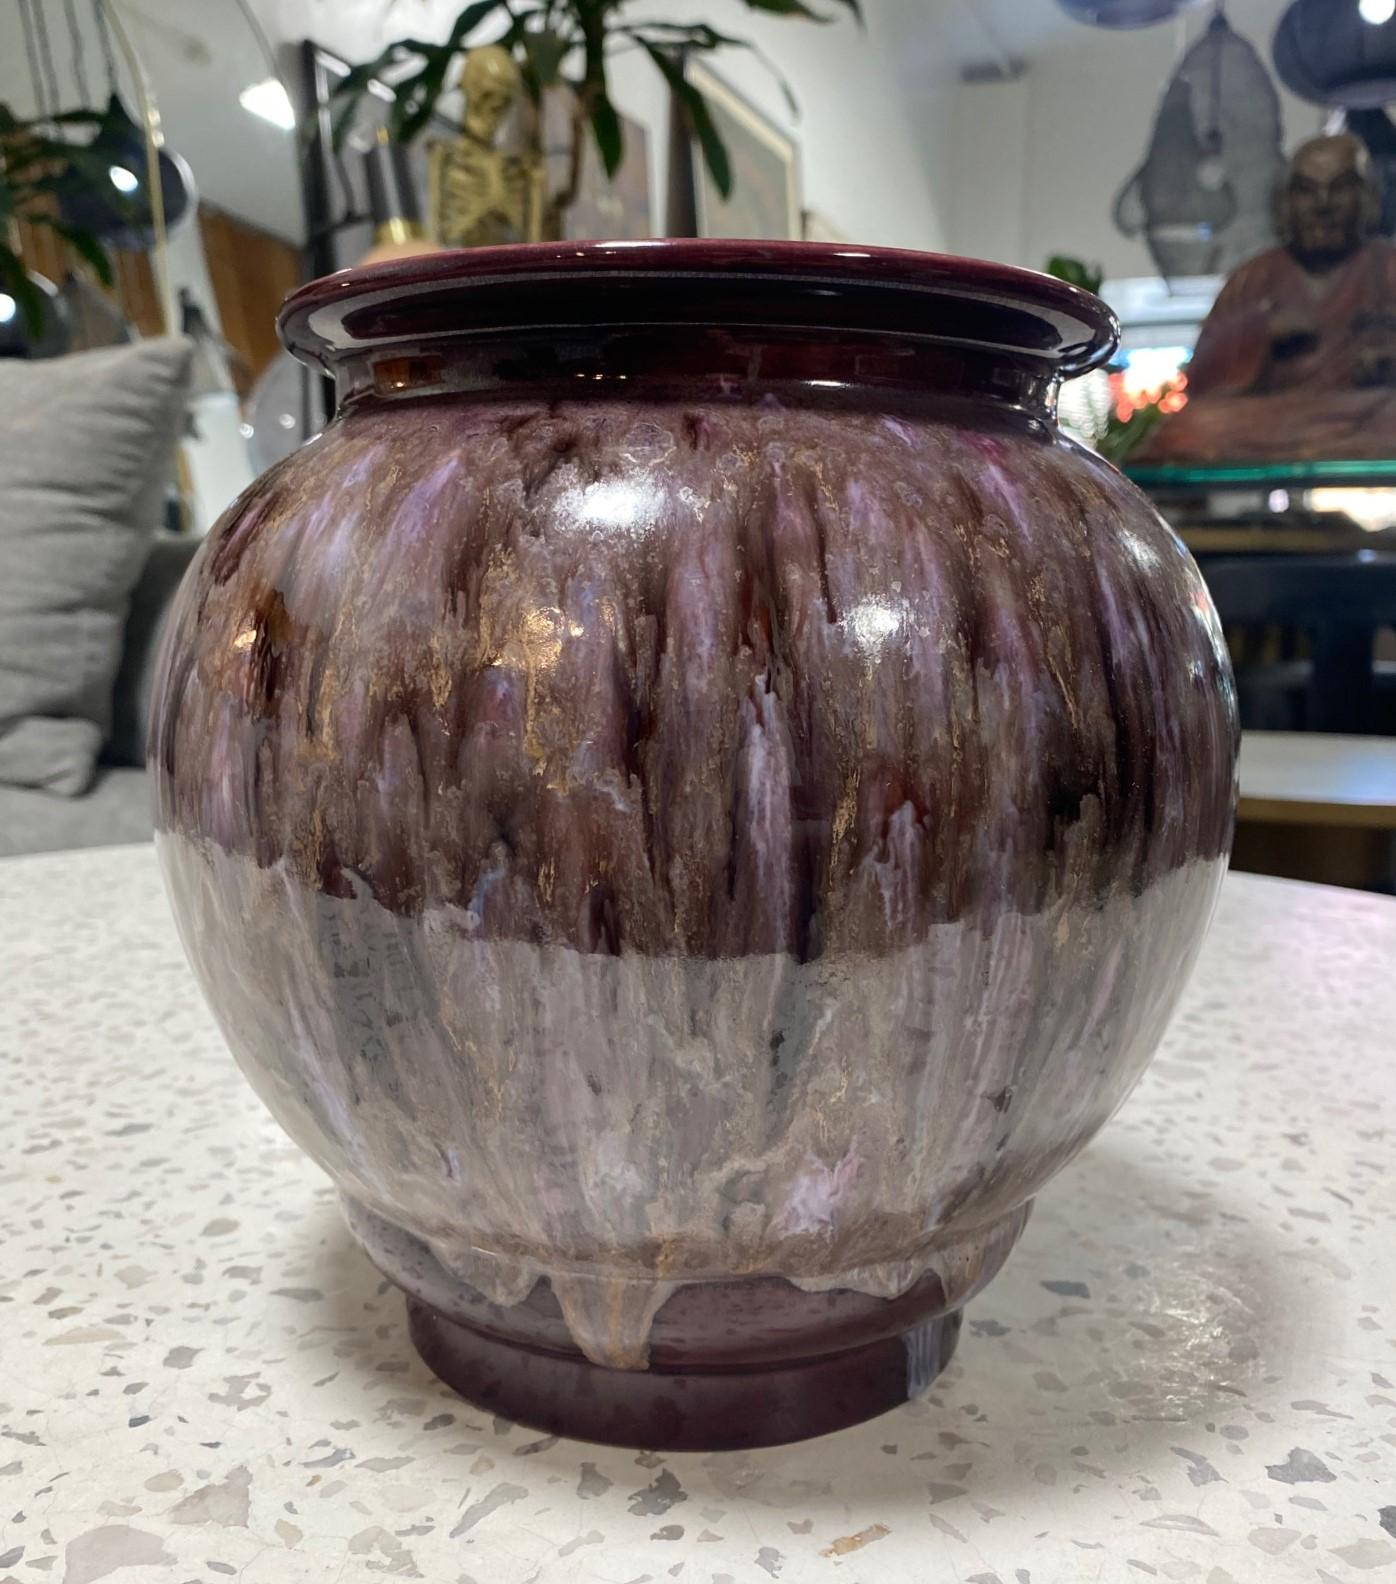 A wonderful, sumptuously glazed planter/vase by American California studio pottery master potter/ceramists Stan Bitters whose work was instrumental in shaping the organic modernist movement in the 1960s. The drip glaze is really quite special on